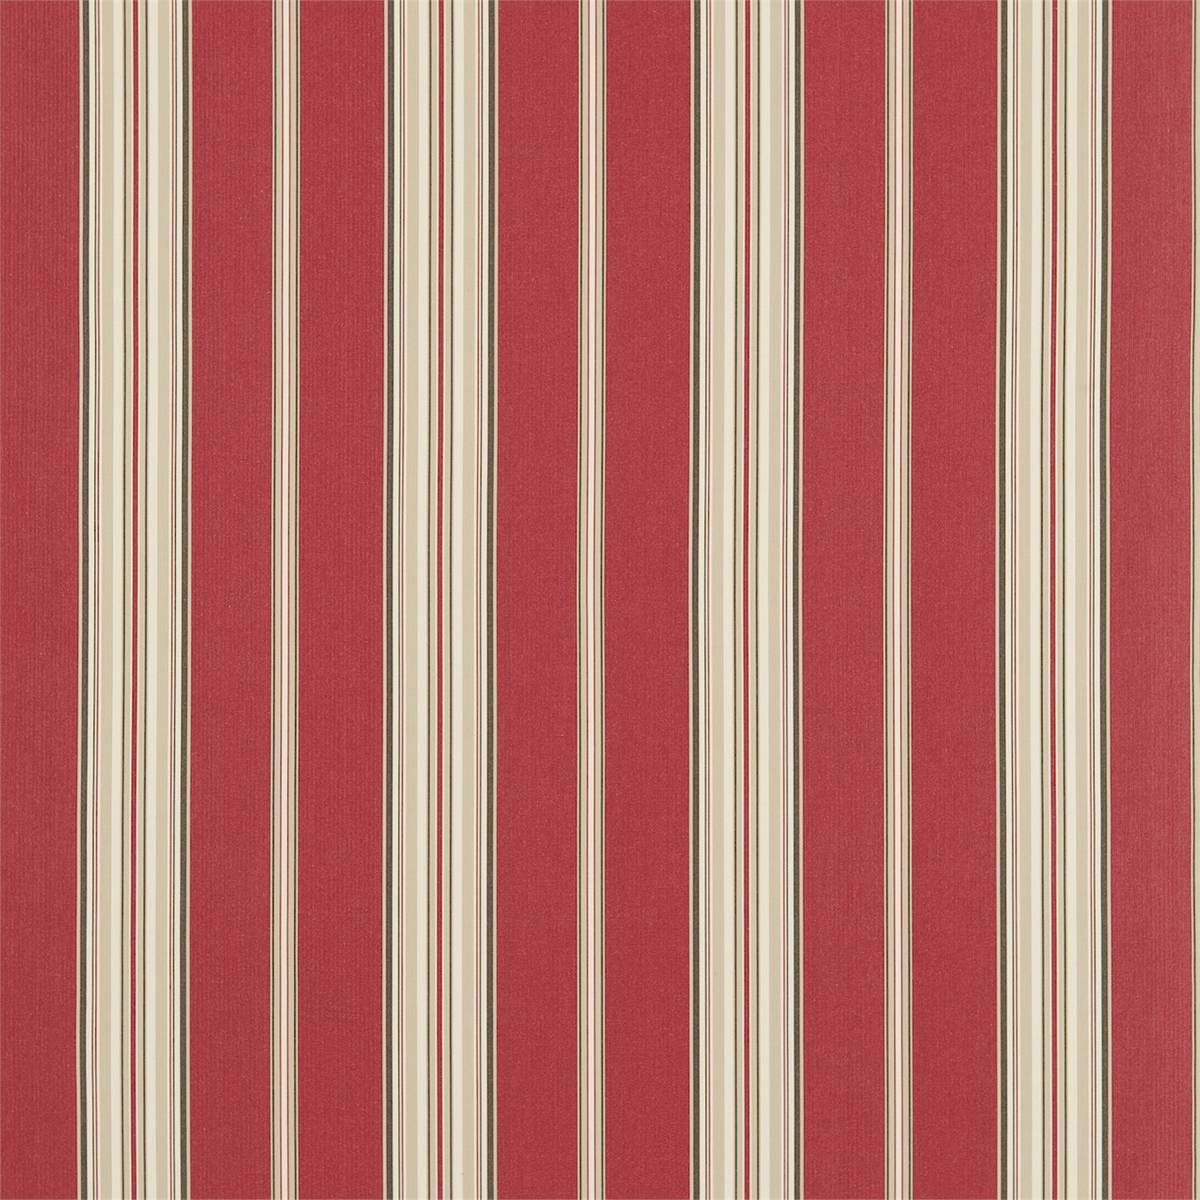 Saxon Red/Chocolate Fabric by Sanderson